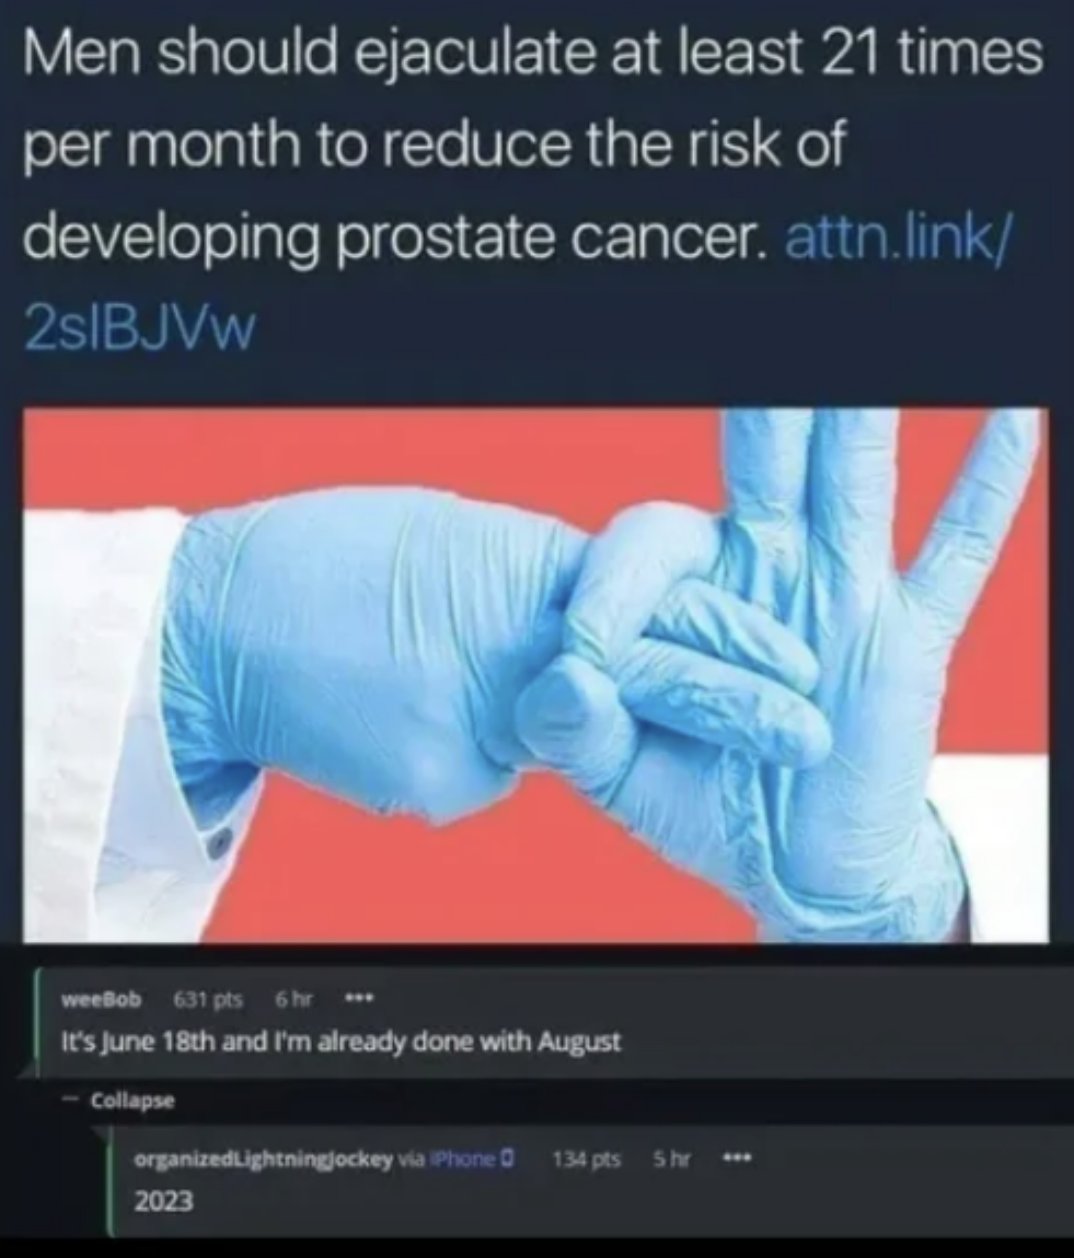 cringe pics - memes only boys will understand - Men should ejaculate at least 21 times per month to reduce the risk of developing prostate cancer. attn.link 2slBJVW weeBob 631 pts Gh It's June 18th and I'm already done with August Collapse organizedLightn